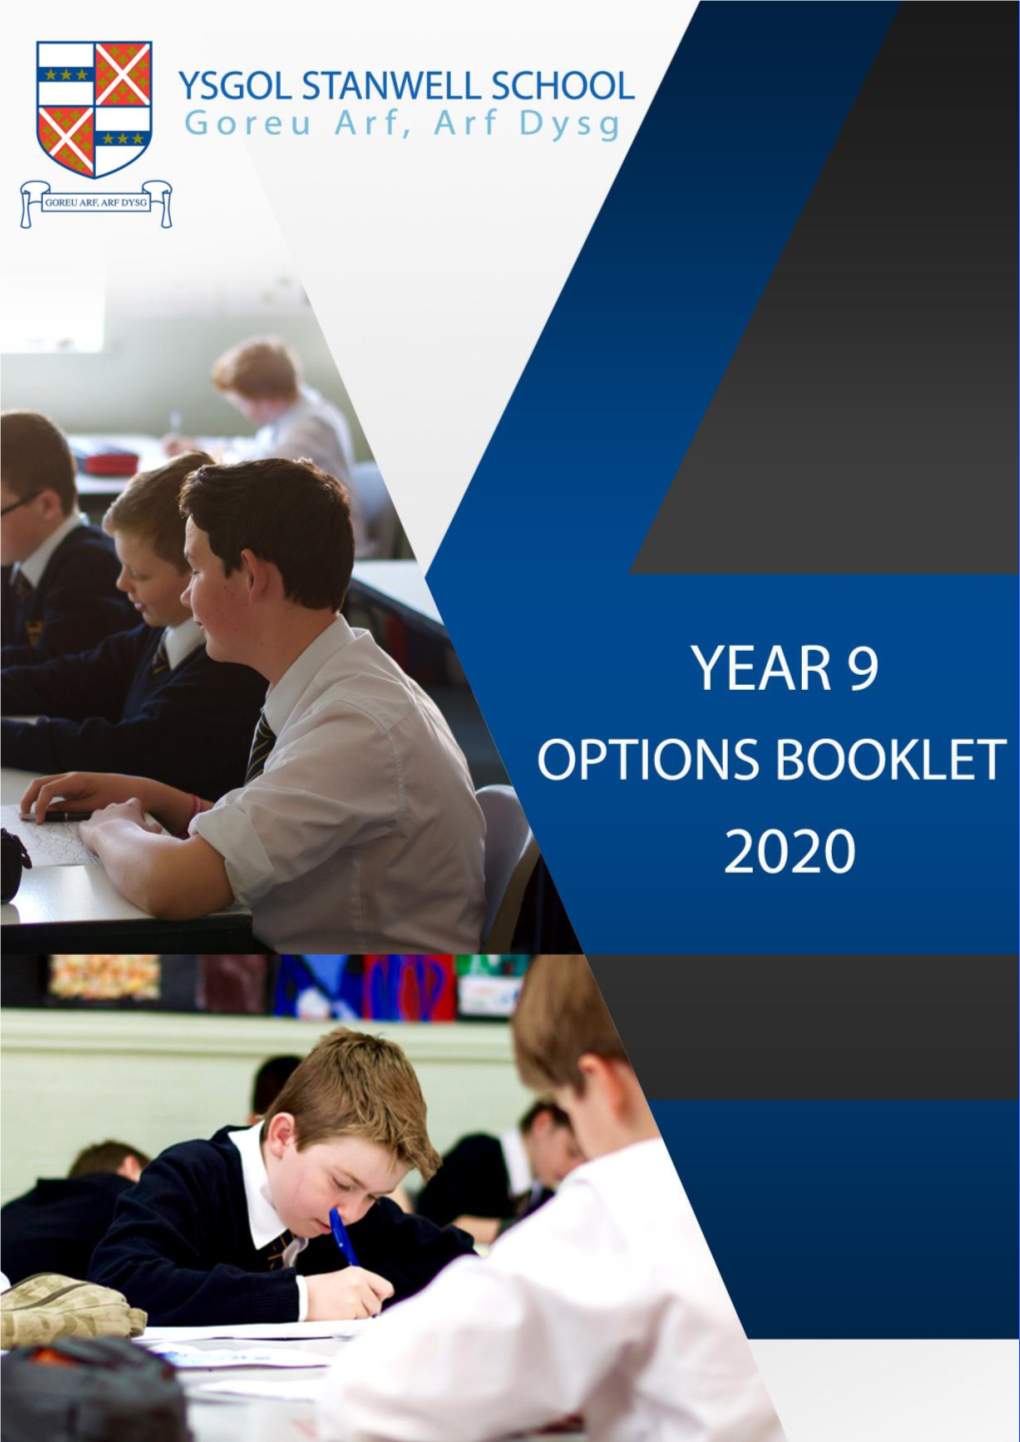 Options-Booklet-Year-9-2020.Pdf